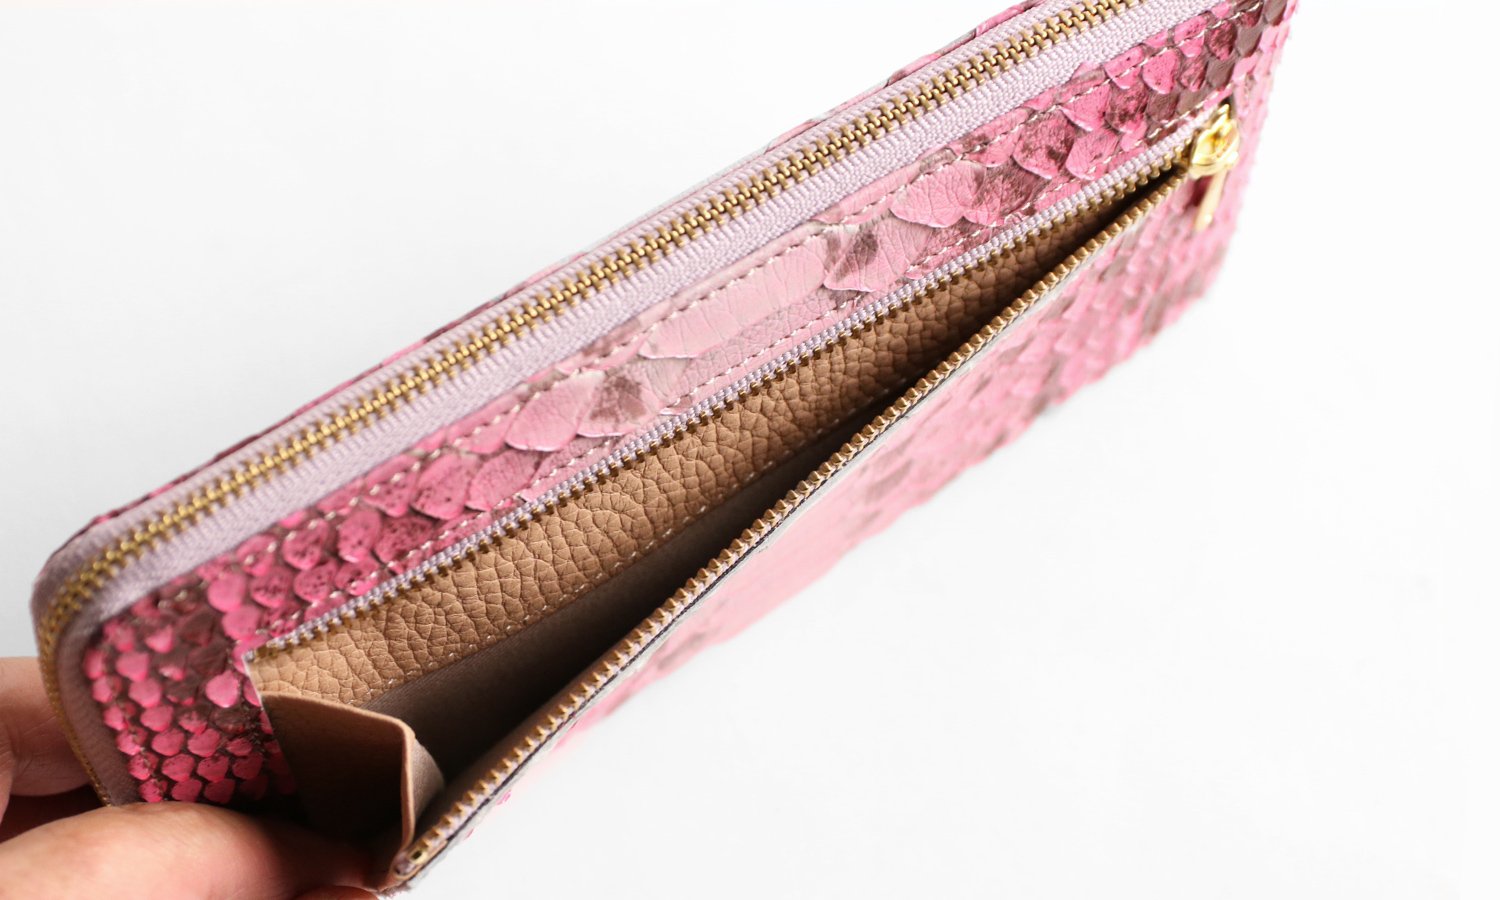 FU-SI FERNALLE / TOPAZ PYTHON wallet collection Beautiful Python L zipper long wallet made in Japan